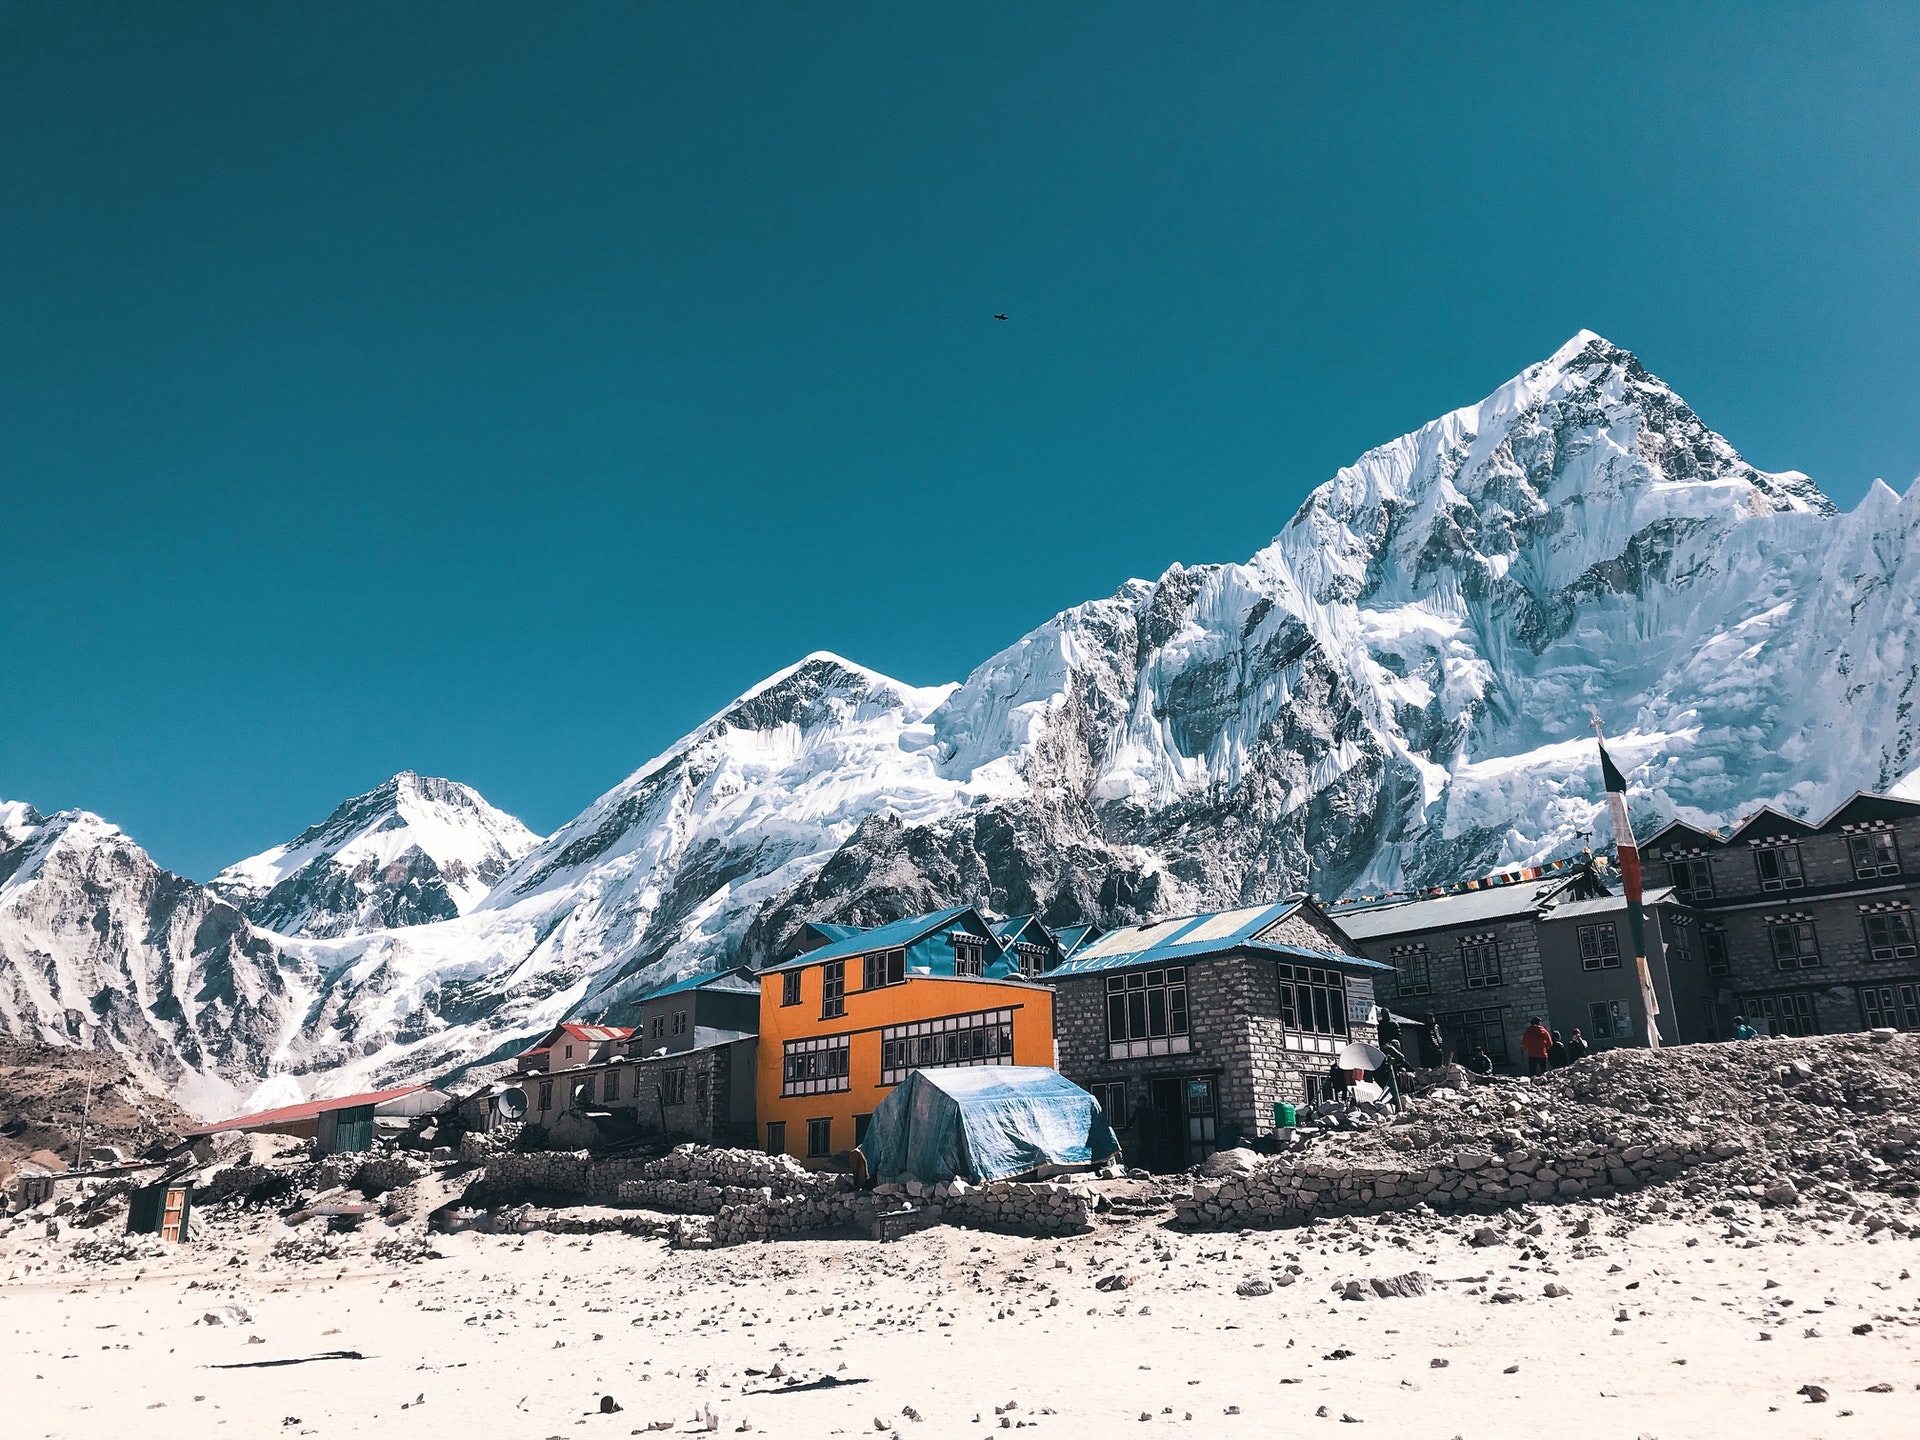 3 Routes to reach Everest base camp - American Travel Blogger